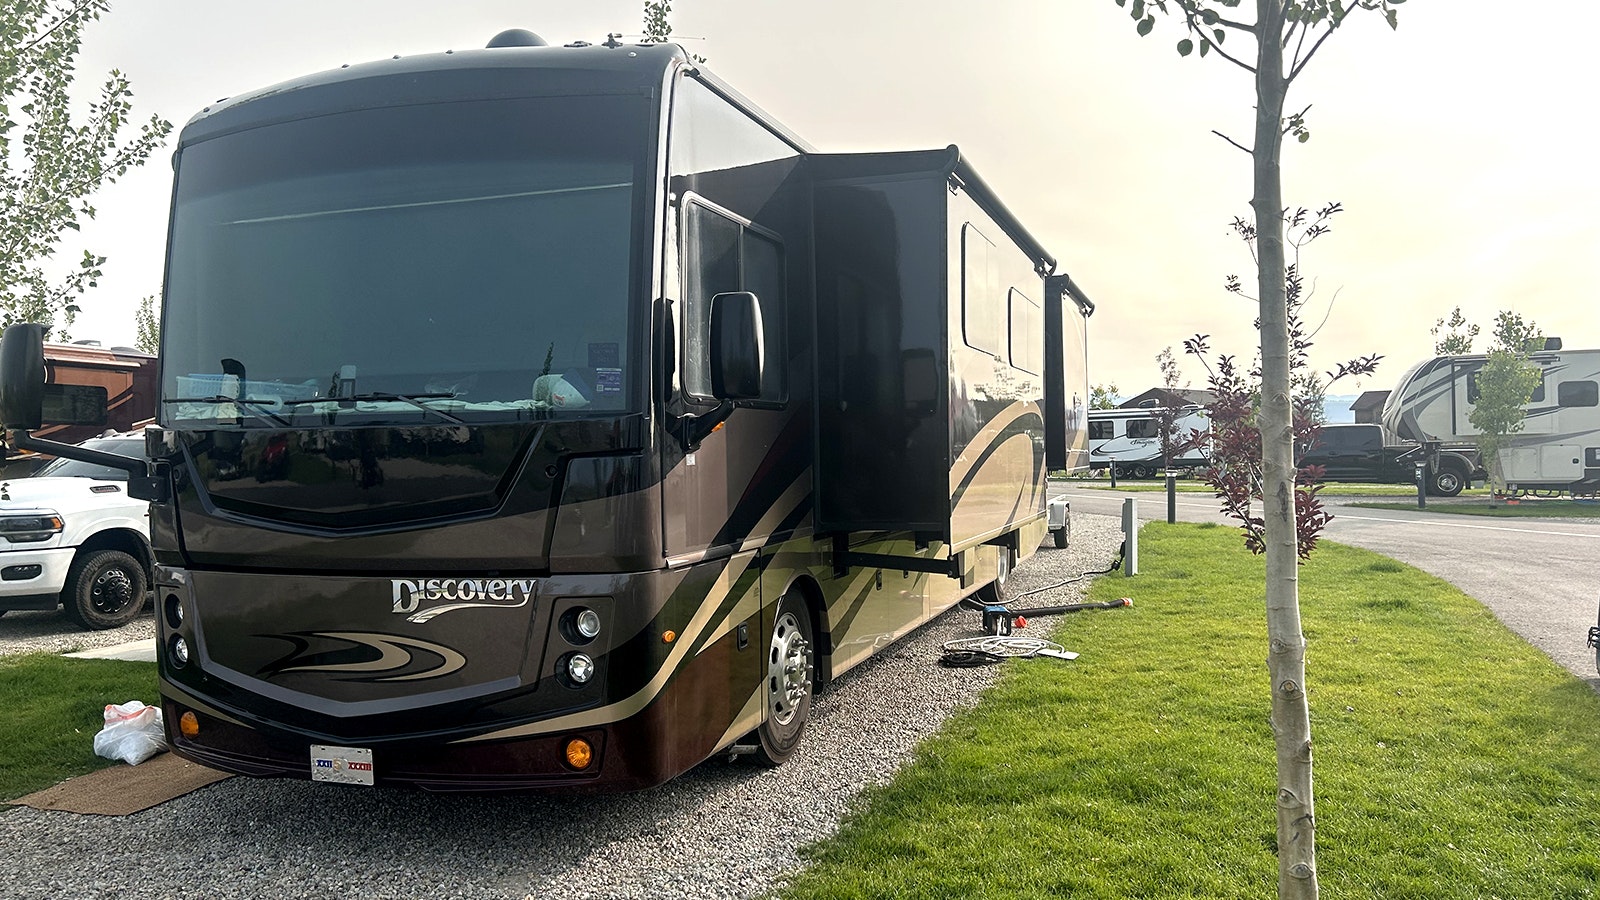 Dave Campbell lives full-time in this 41-foot Fleetwood Discovery motor home.